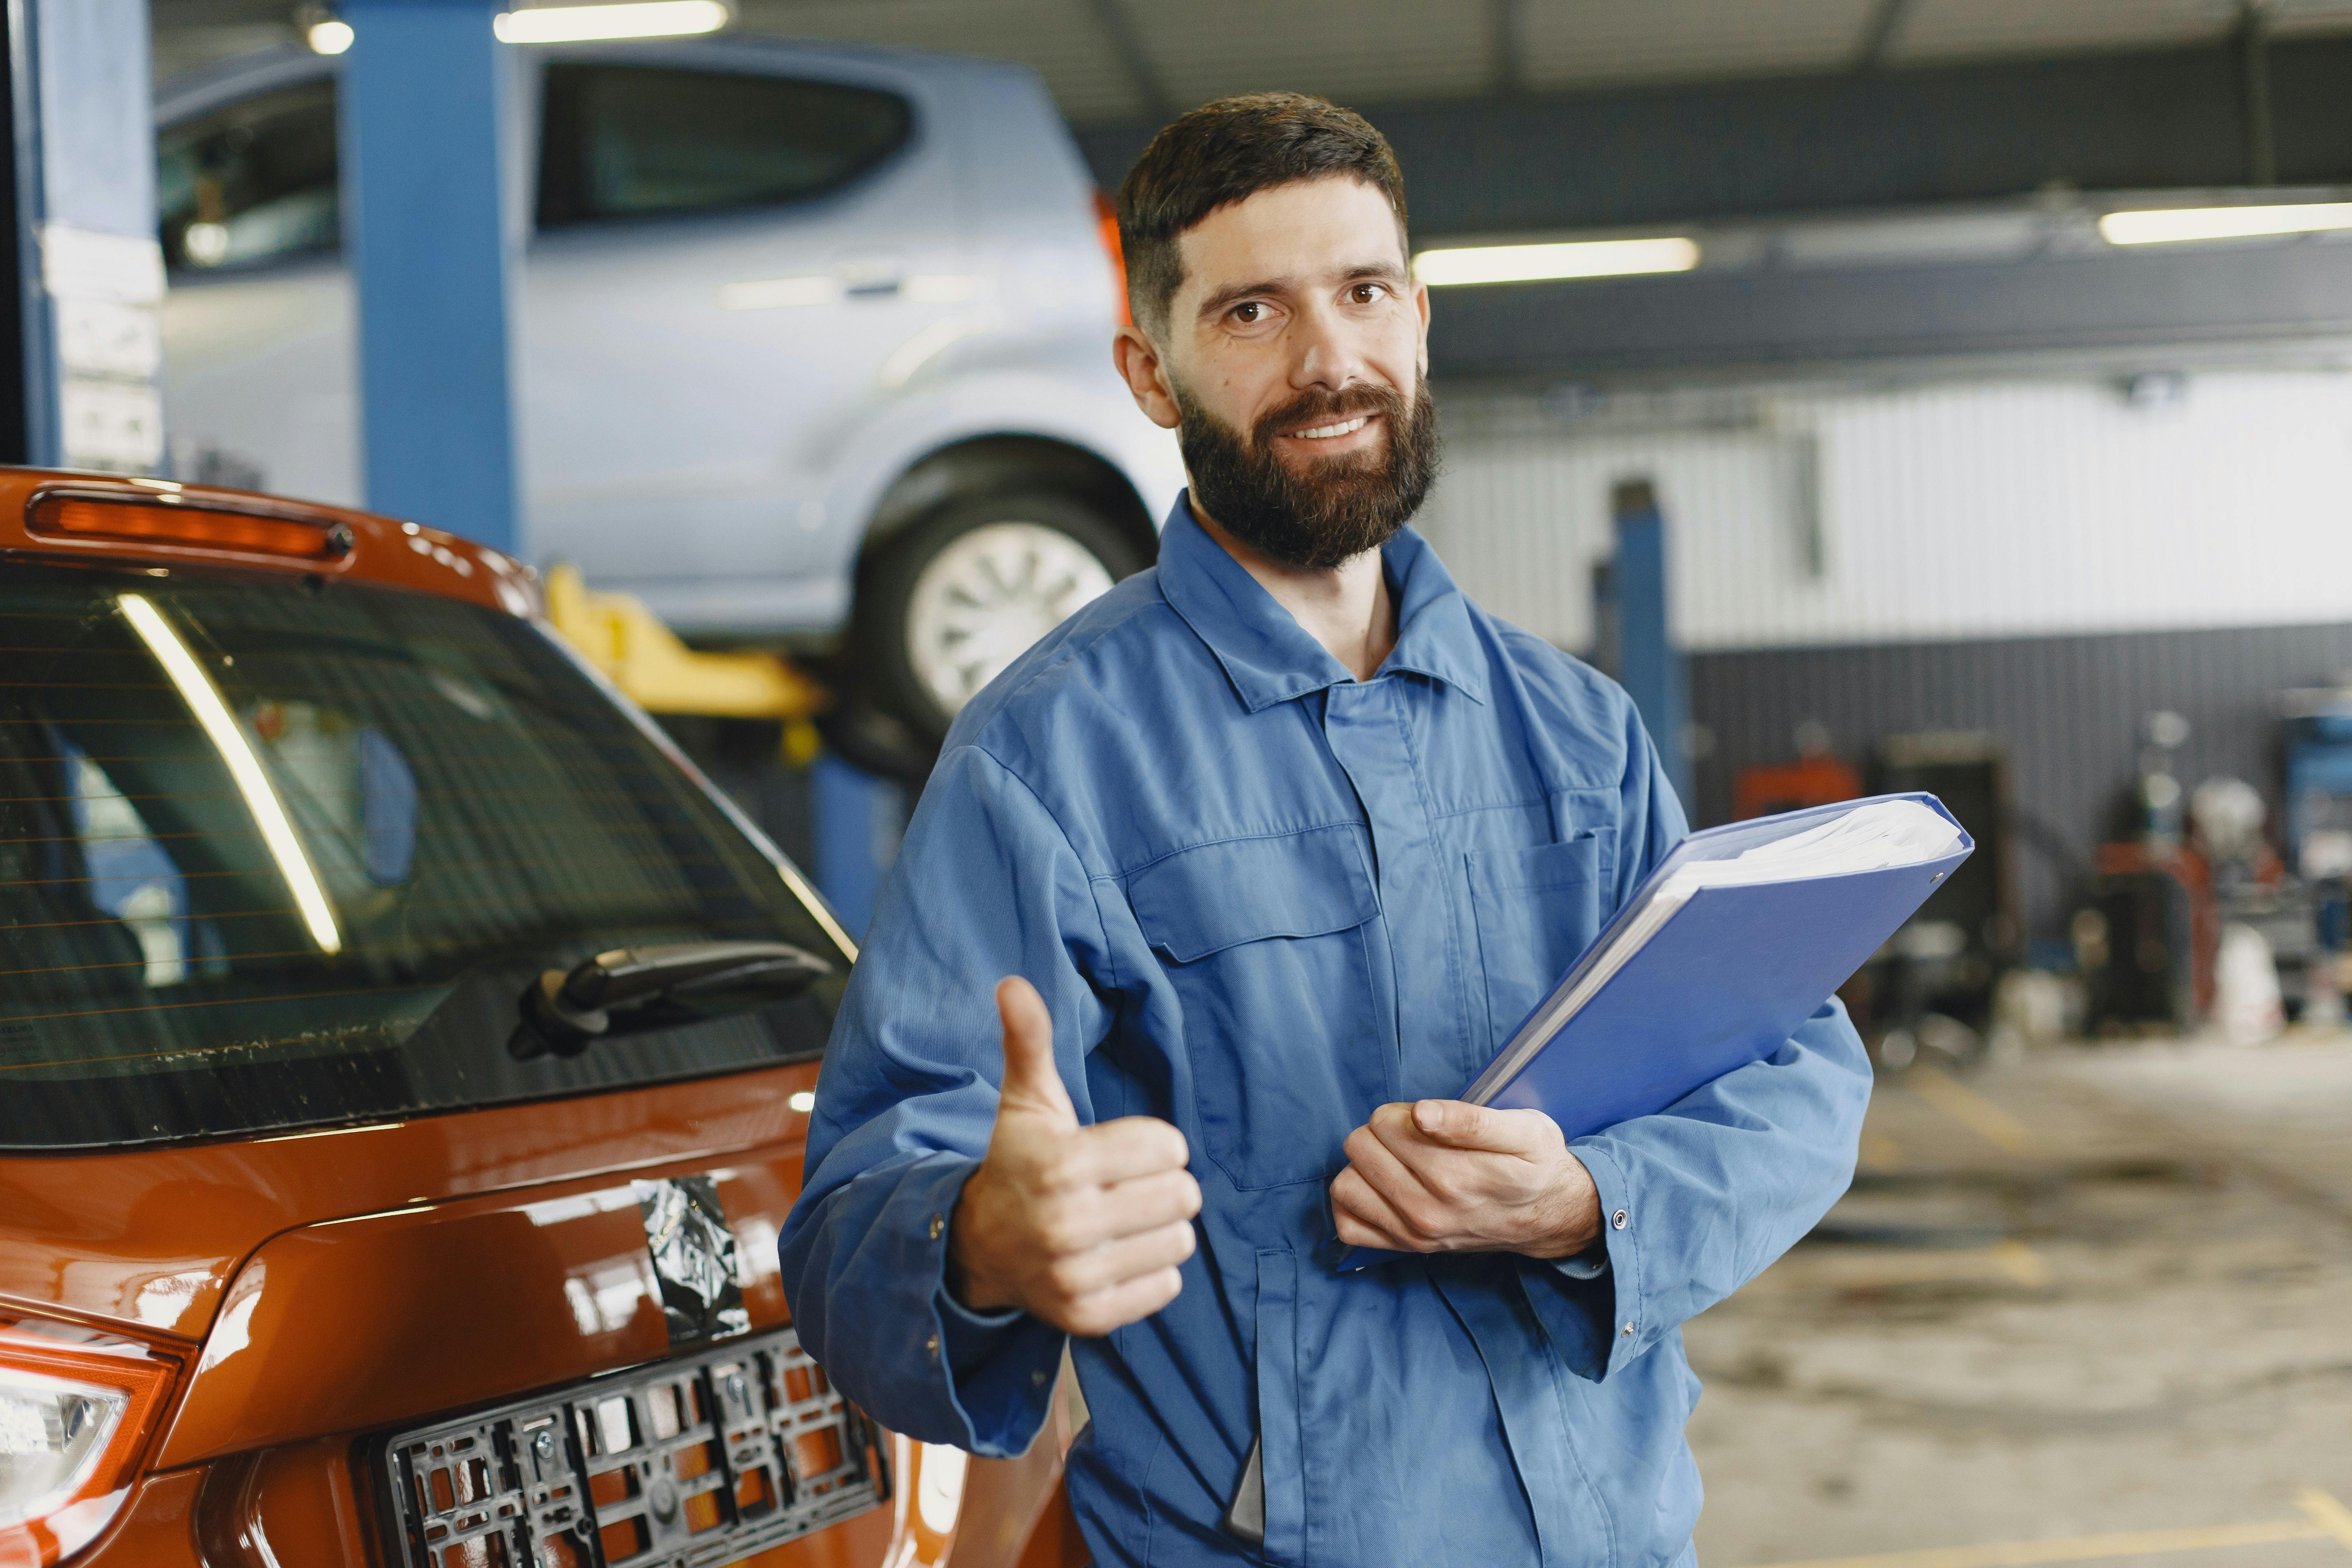 Car mechanic in shop giving thumbs up